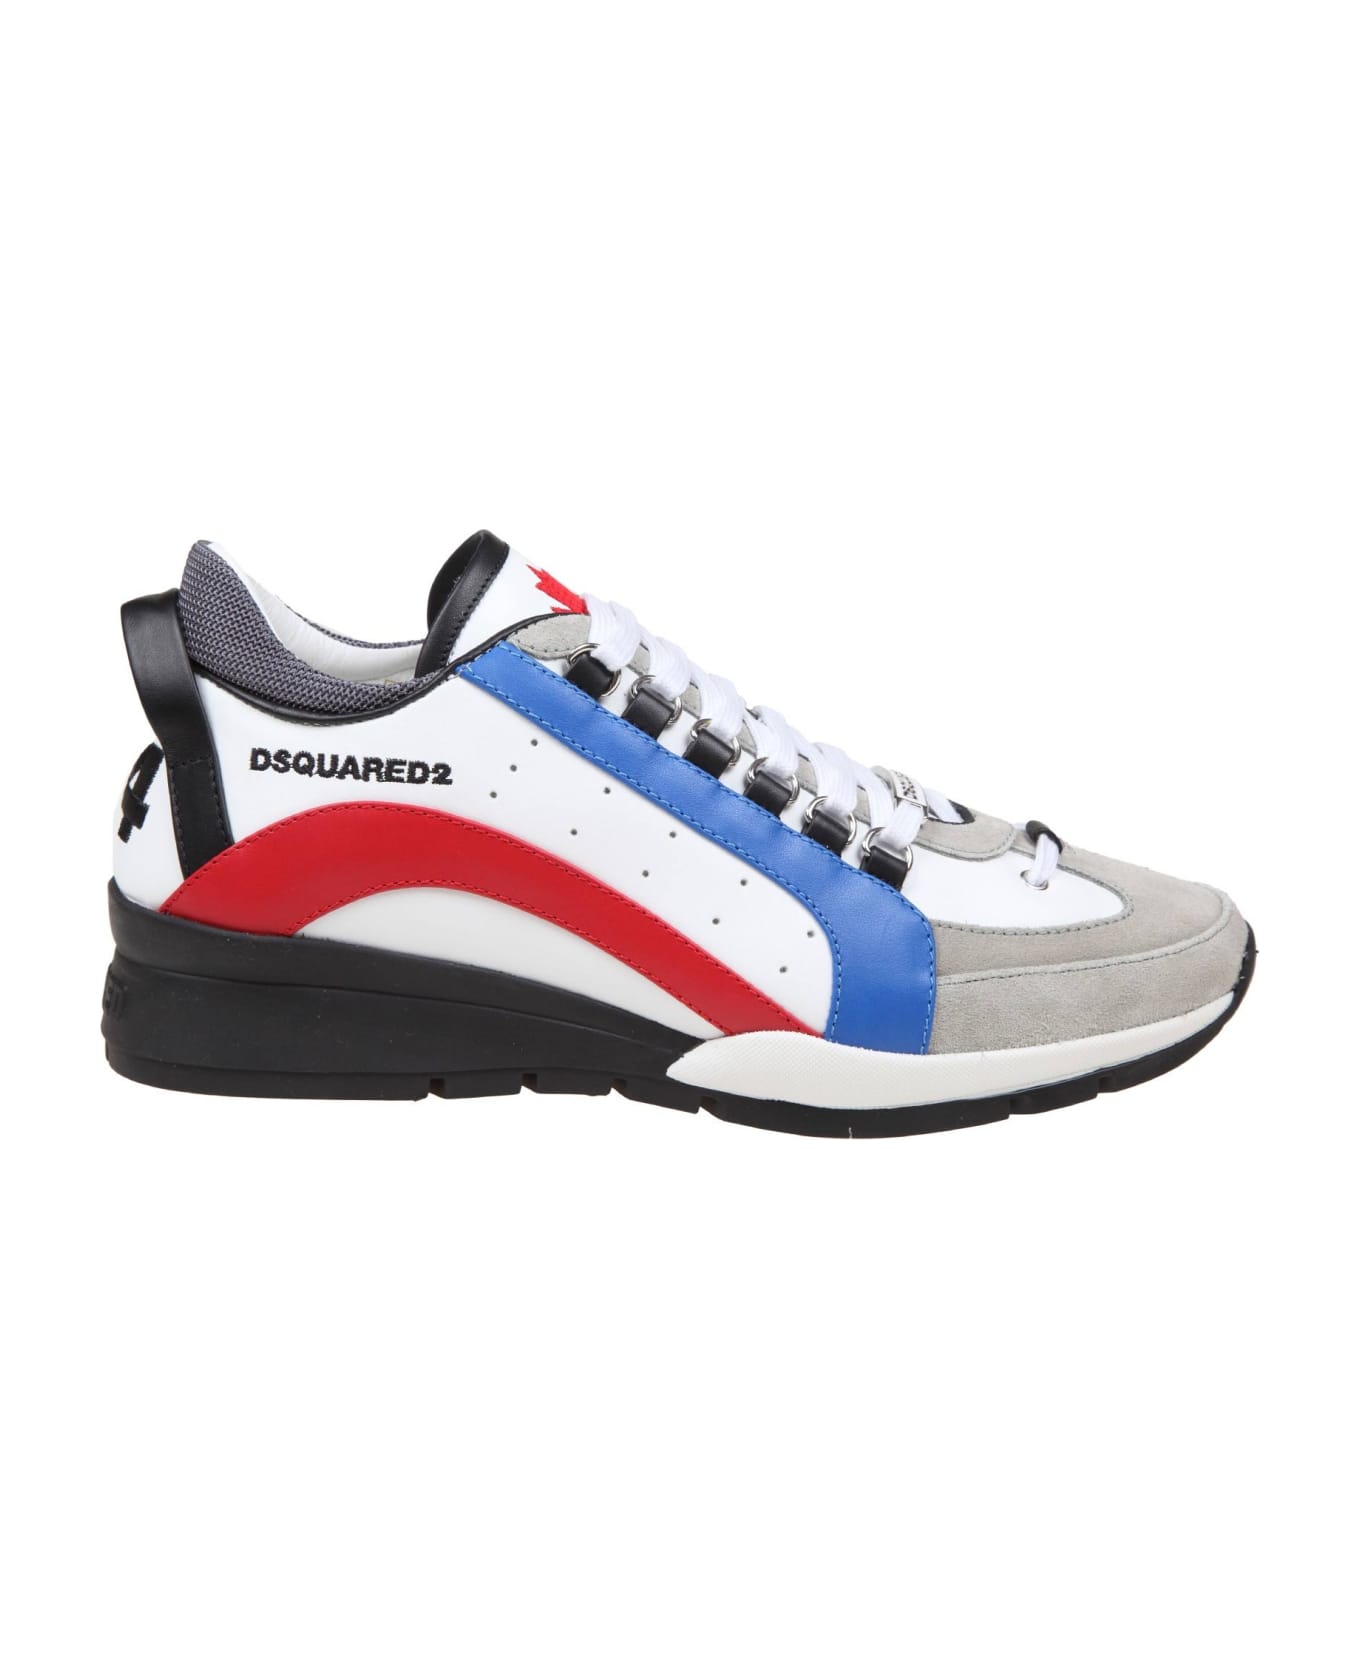 Dsquared2 Legend Sneakers In Suede And Leather - WHITE スニーカー